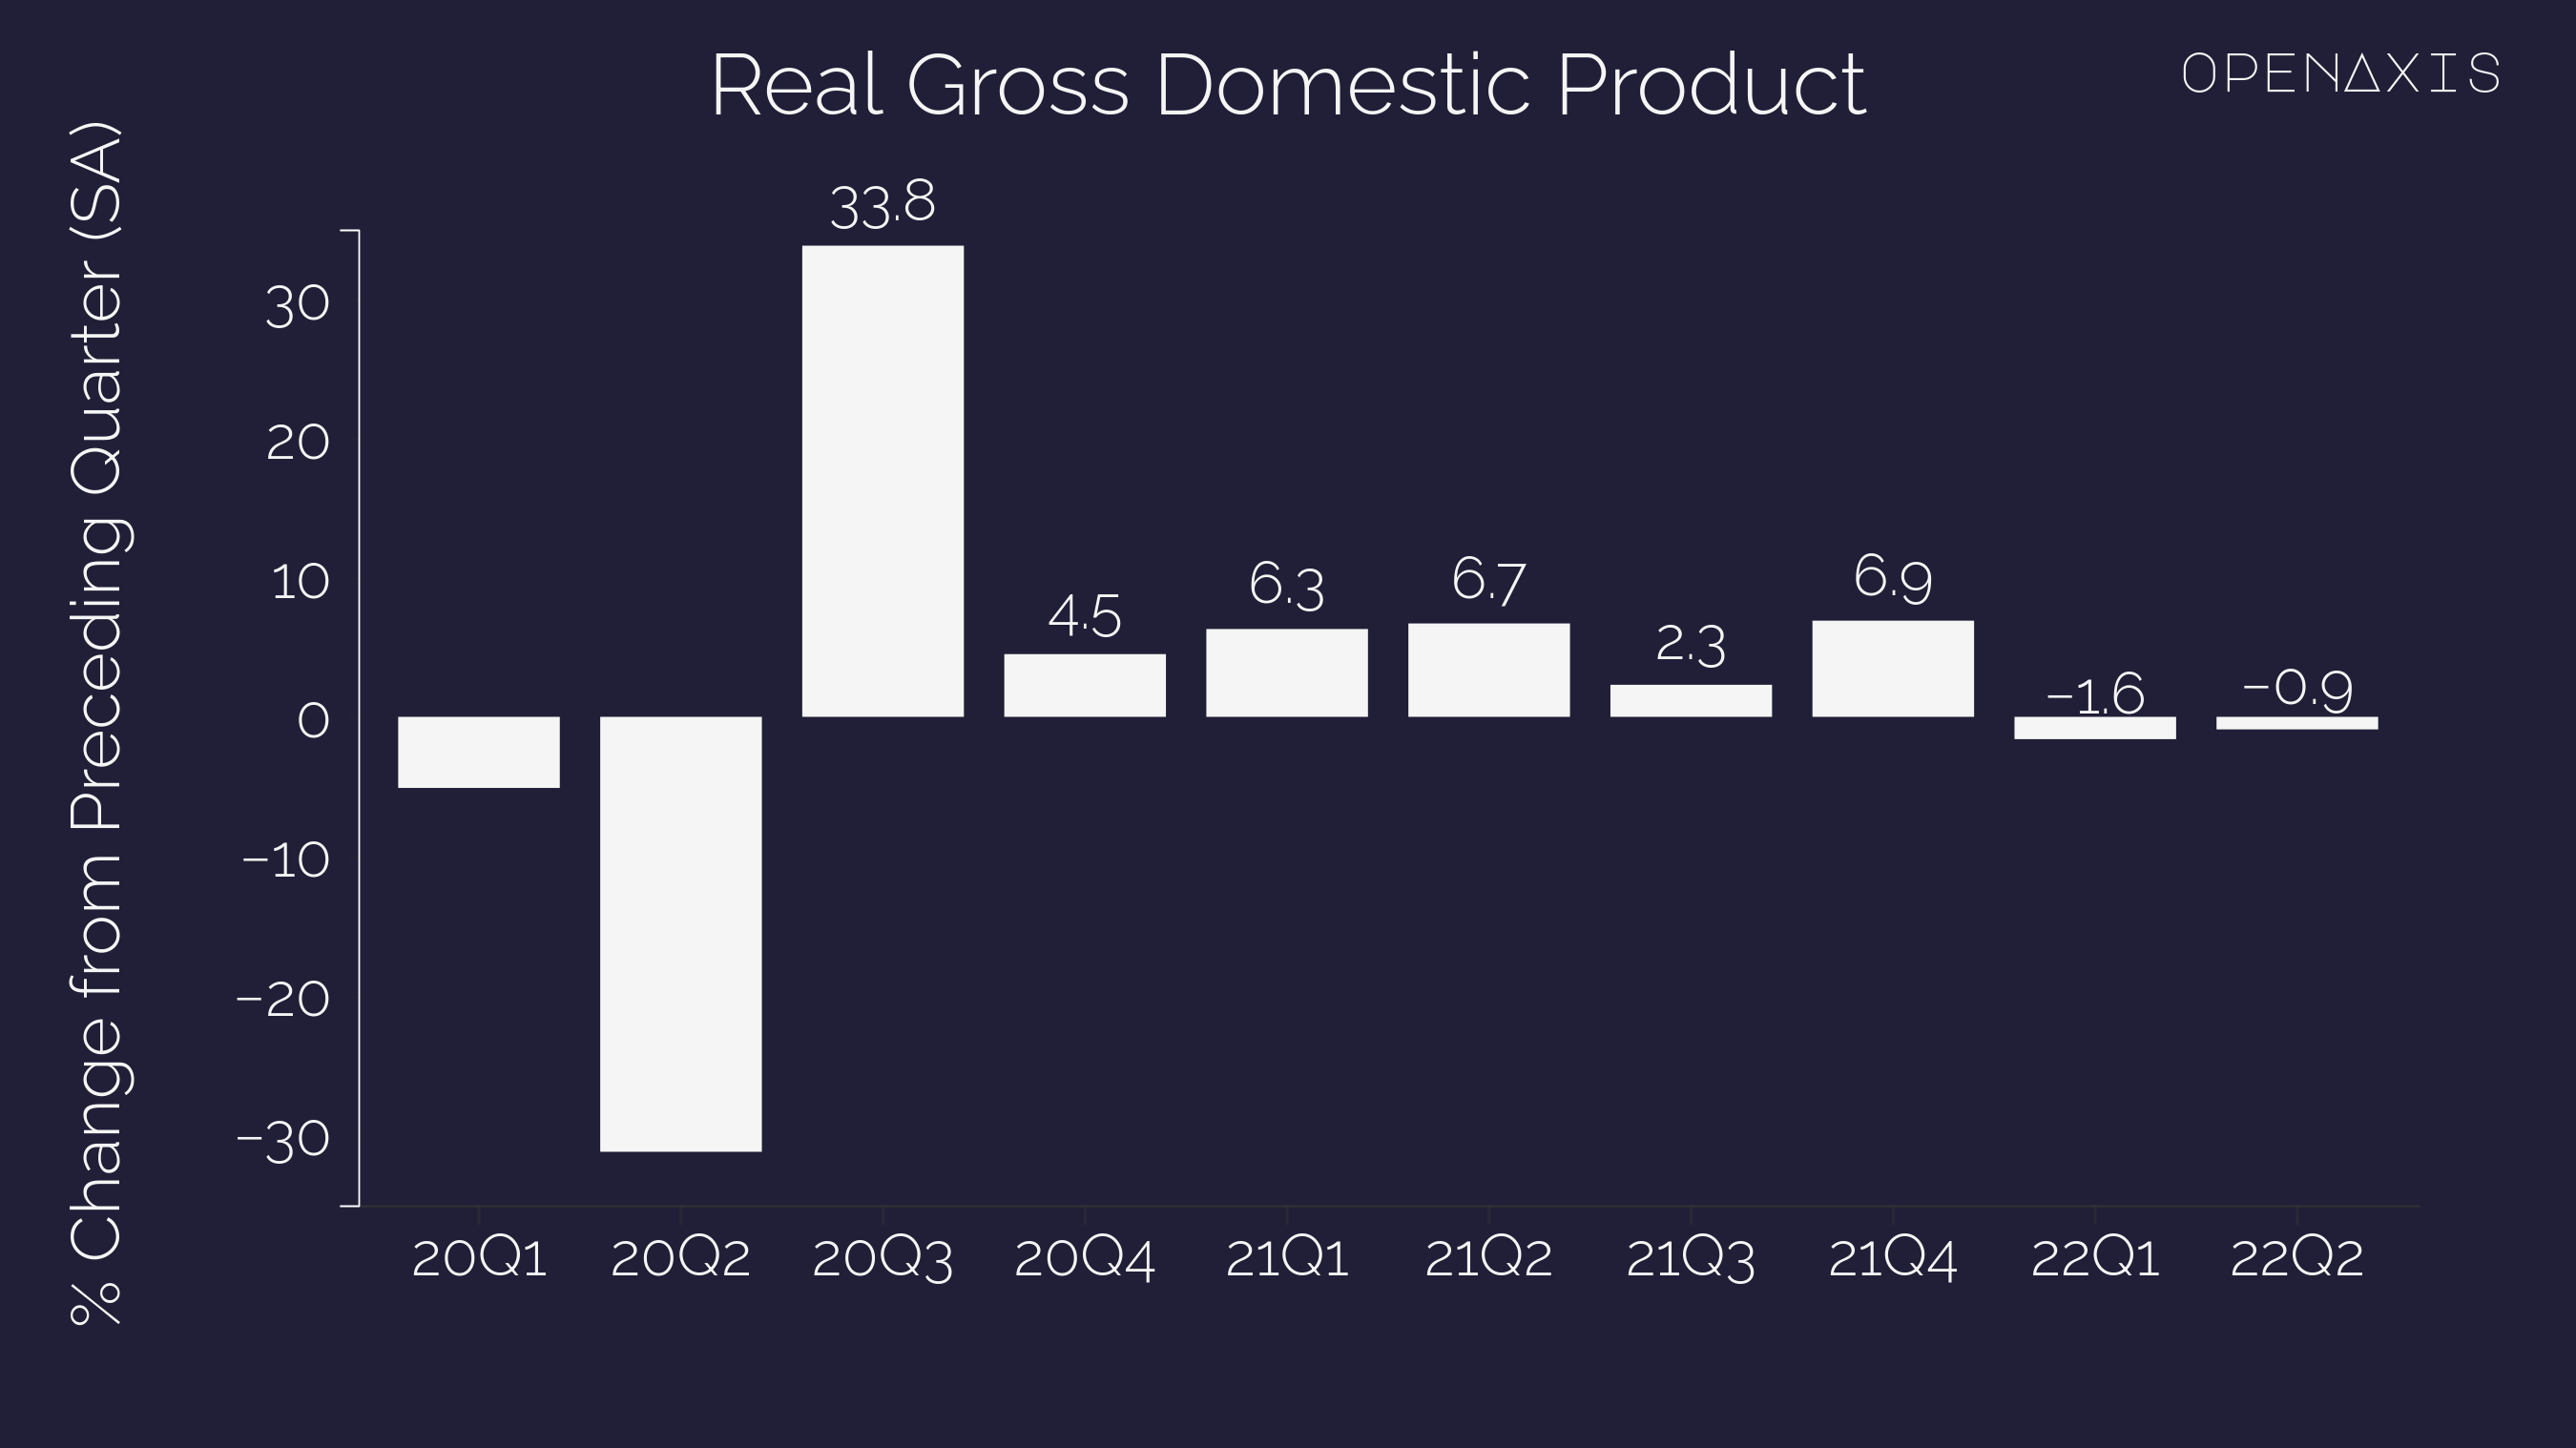 "Real Gross Domestic Product"